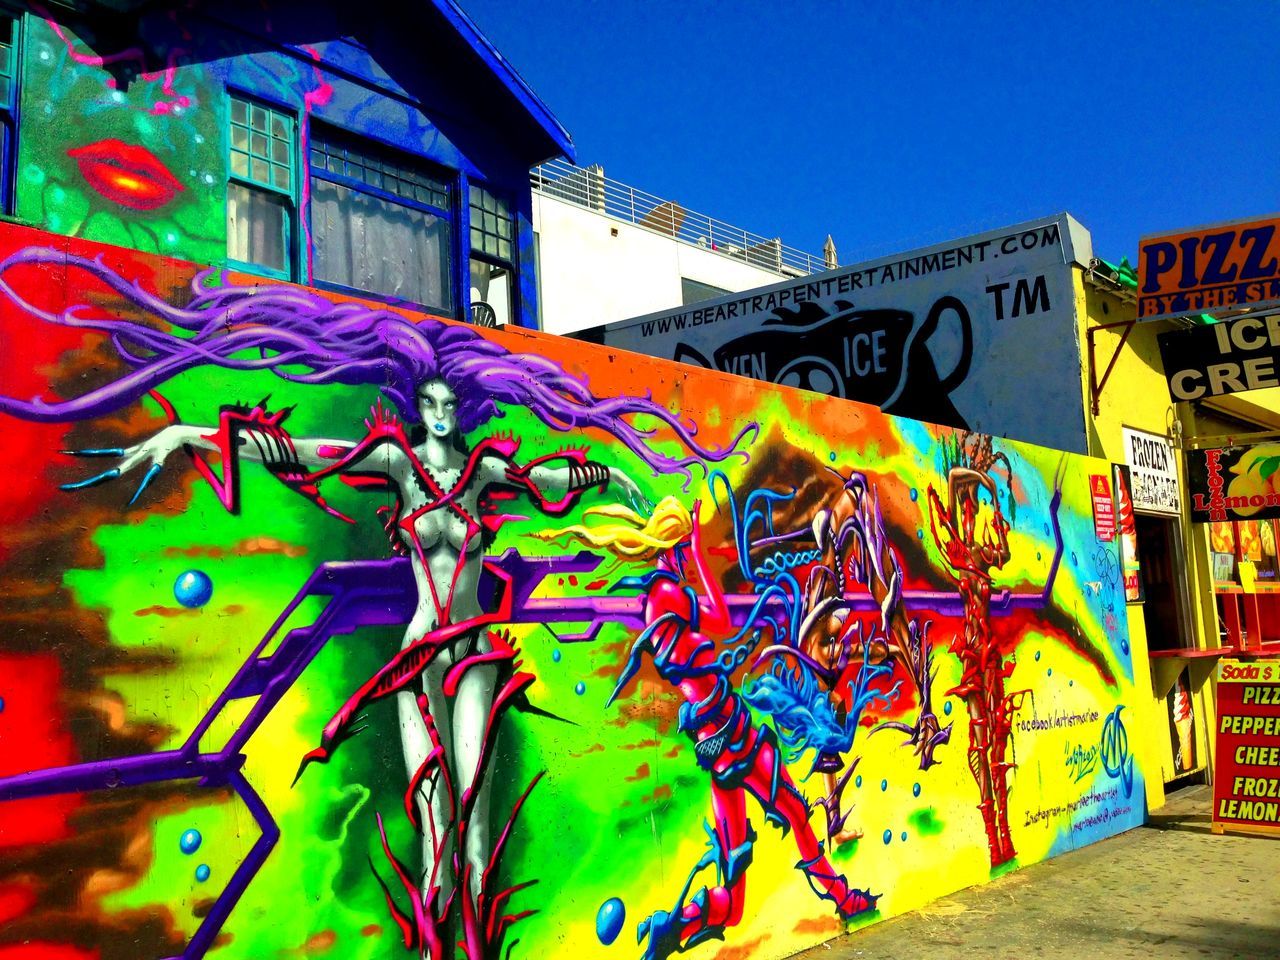 graffiti, art, creativity, art and craft, multi colored, architecture, built structure, text, wall - building feature, building exterior, street art, human representation, western script, communication, mural, colorful, blue, vandalism, low angle view